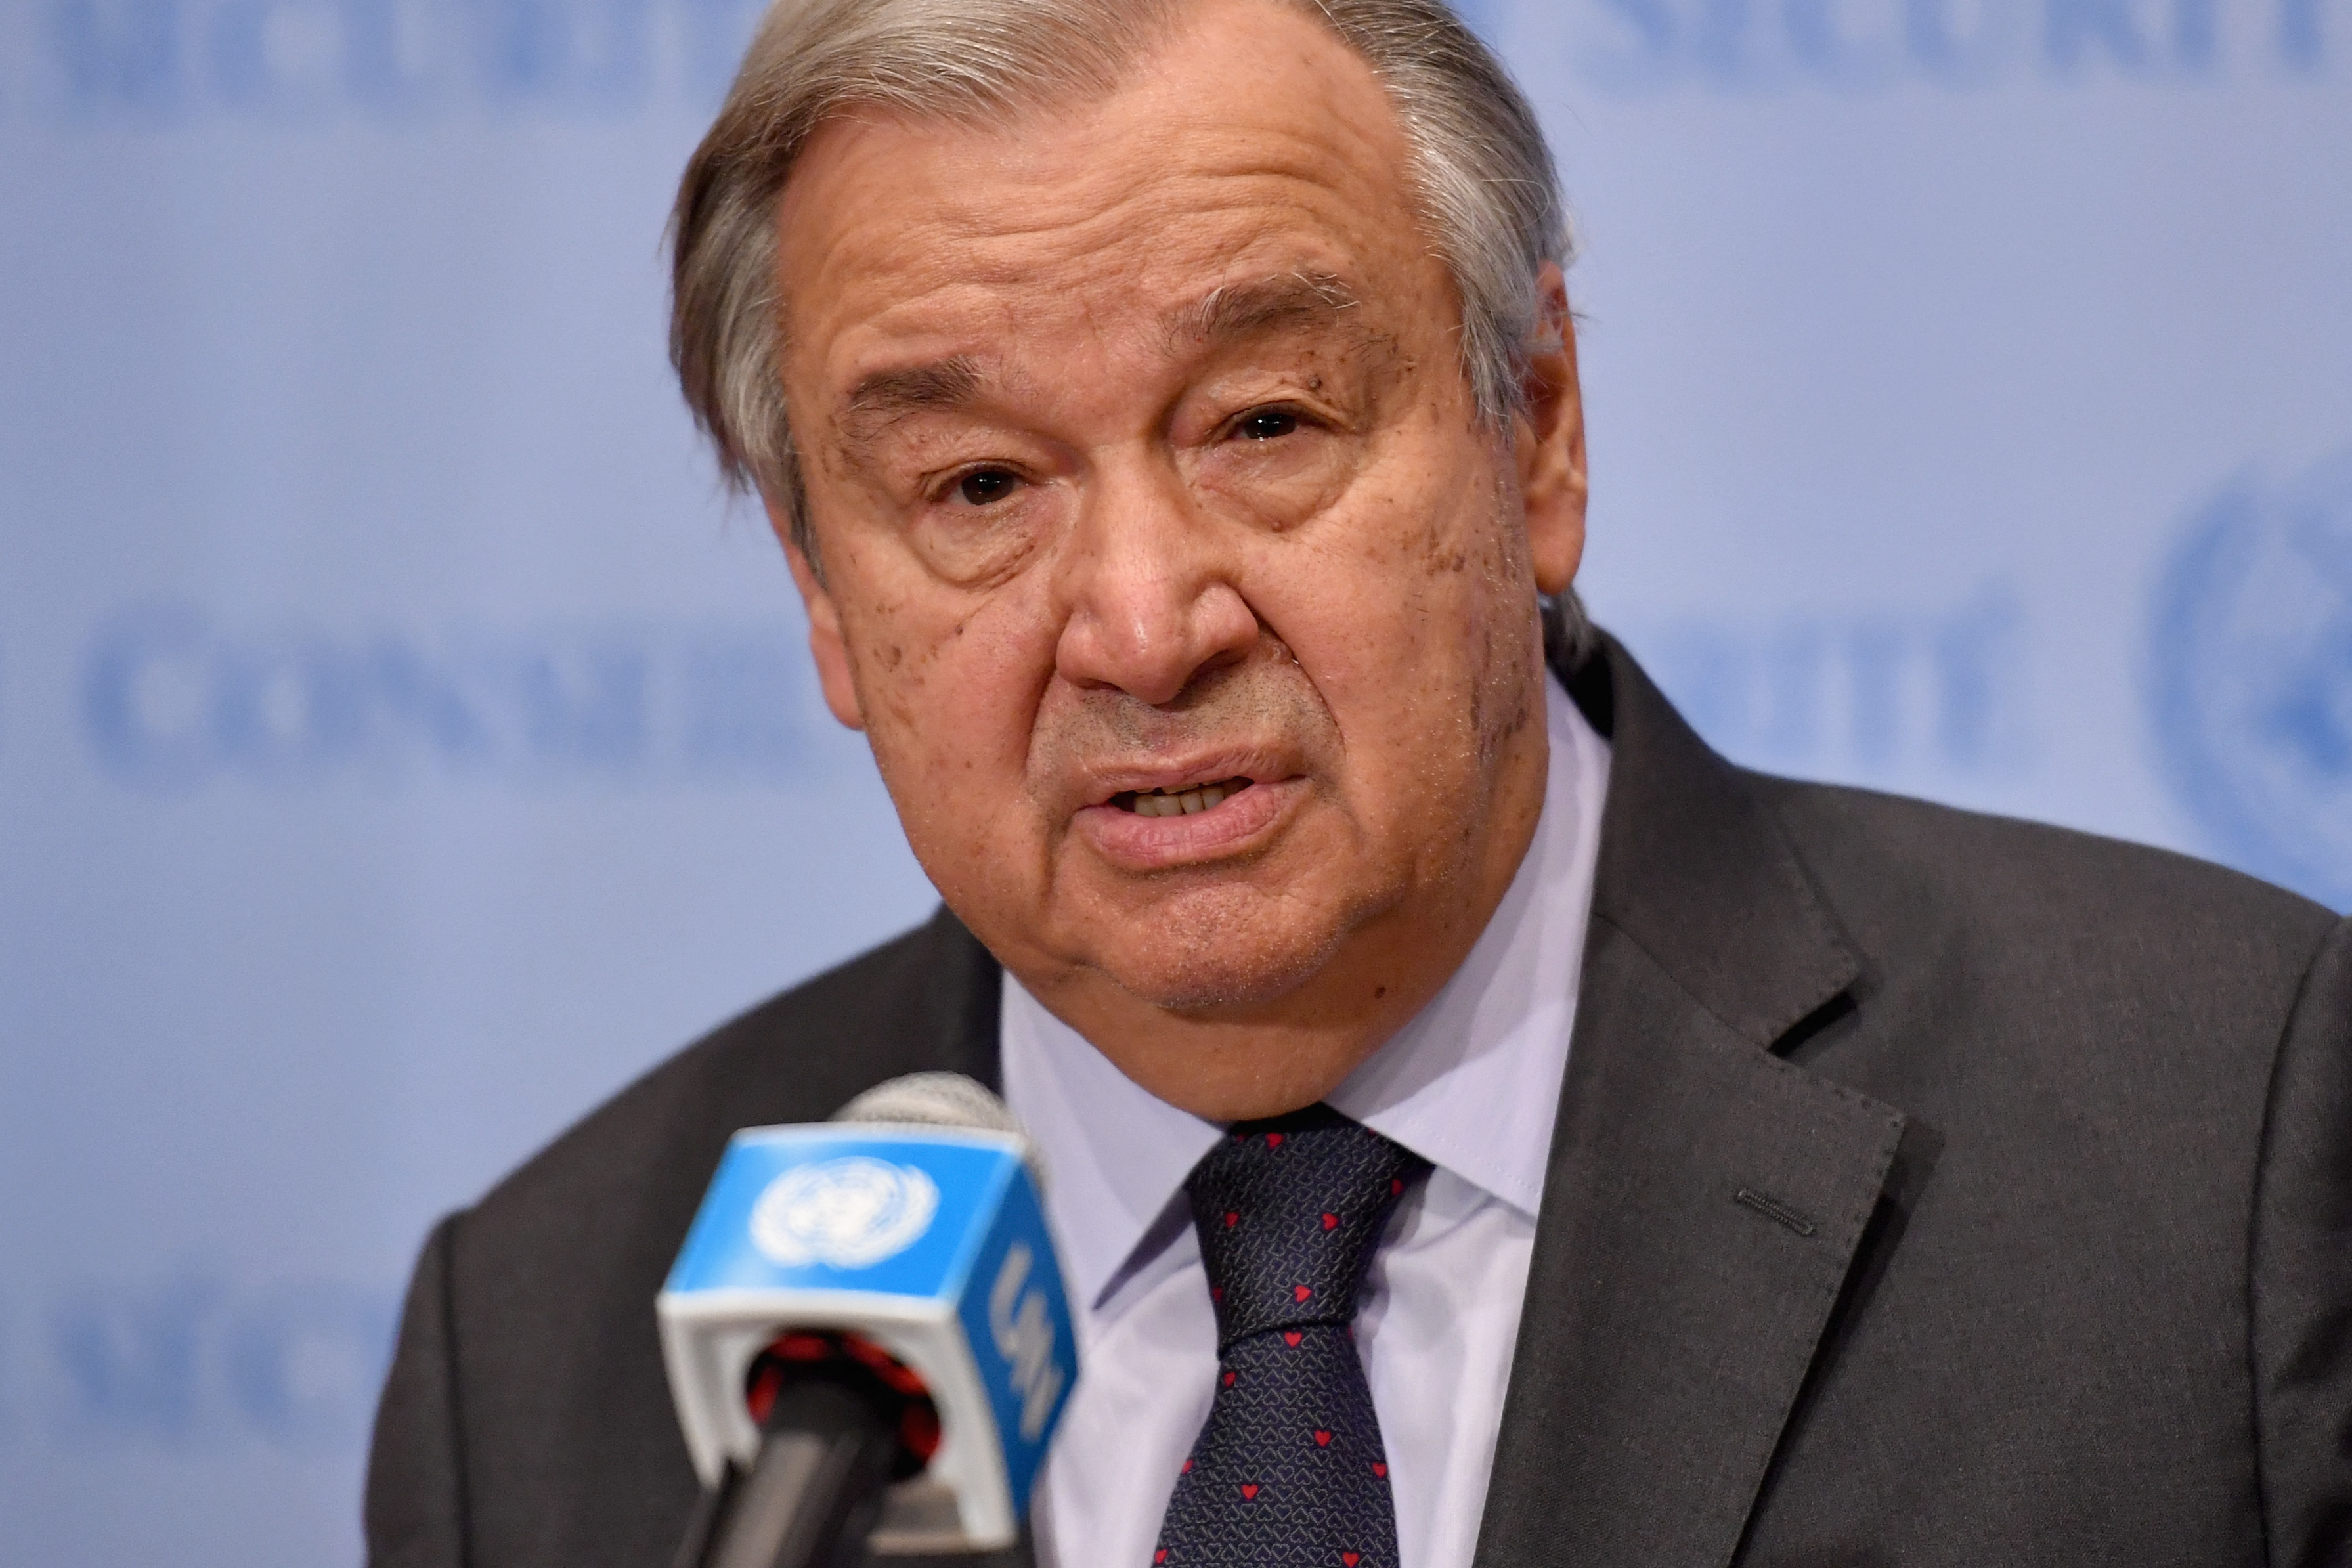 UN Secretary-General António Guterres speaks during a press conference at the United Nations headquarters in New York City on February 22.